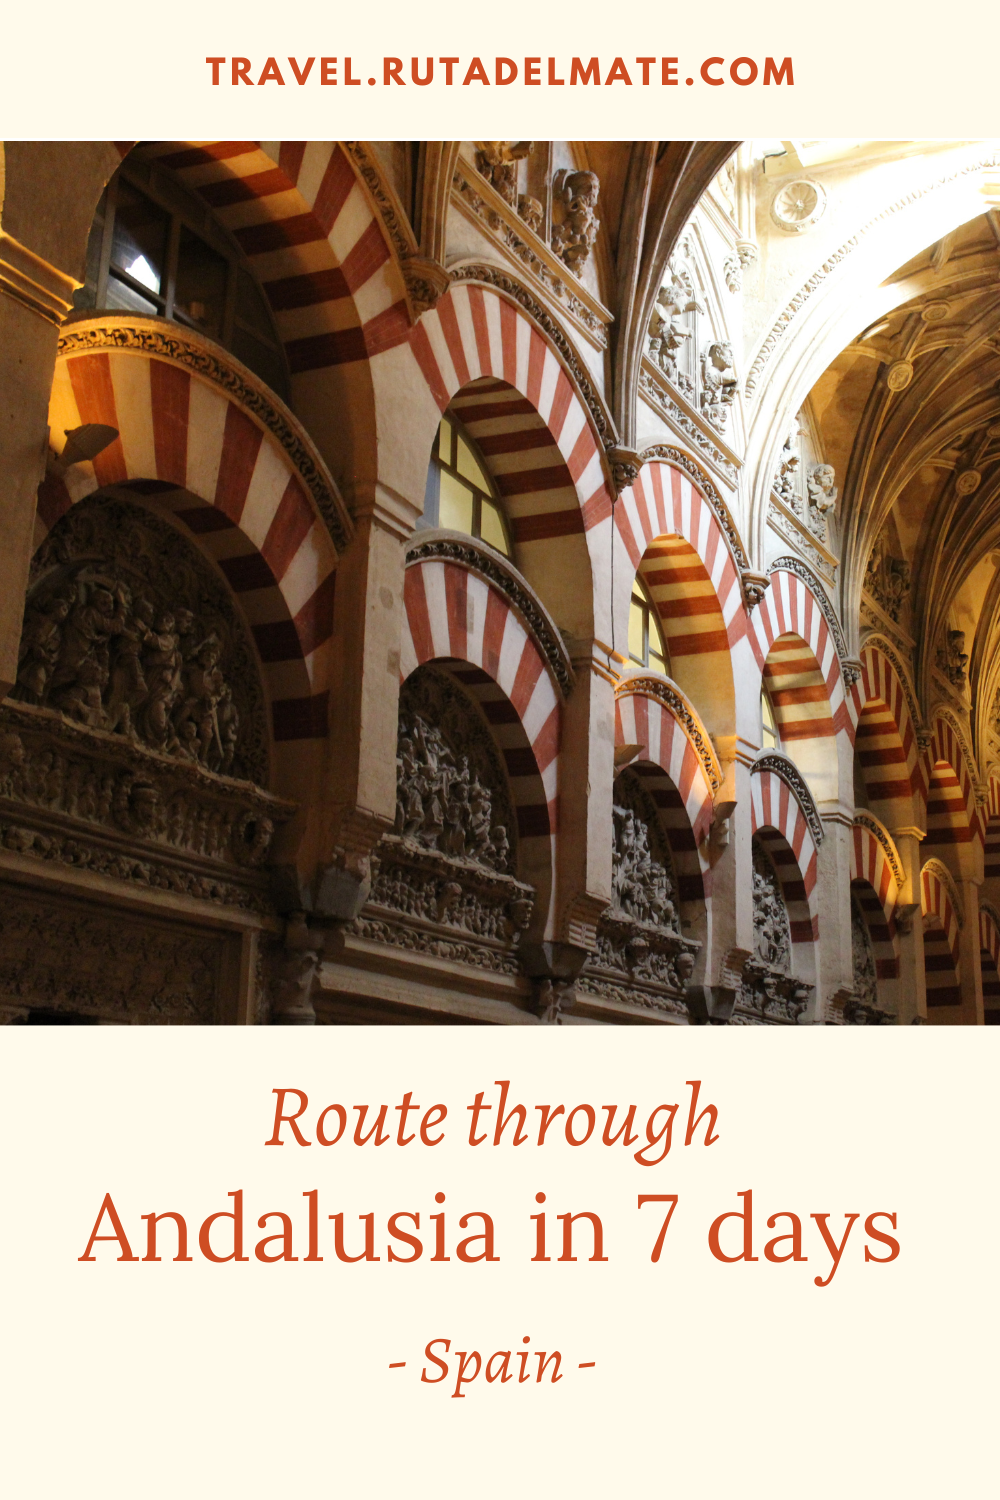 route through Andalusia in 7 days